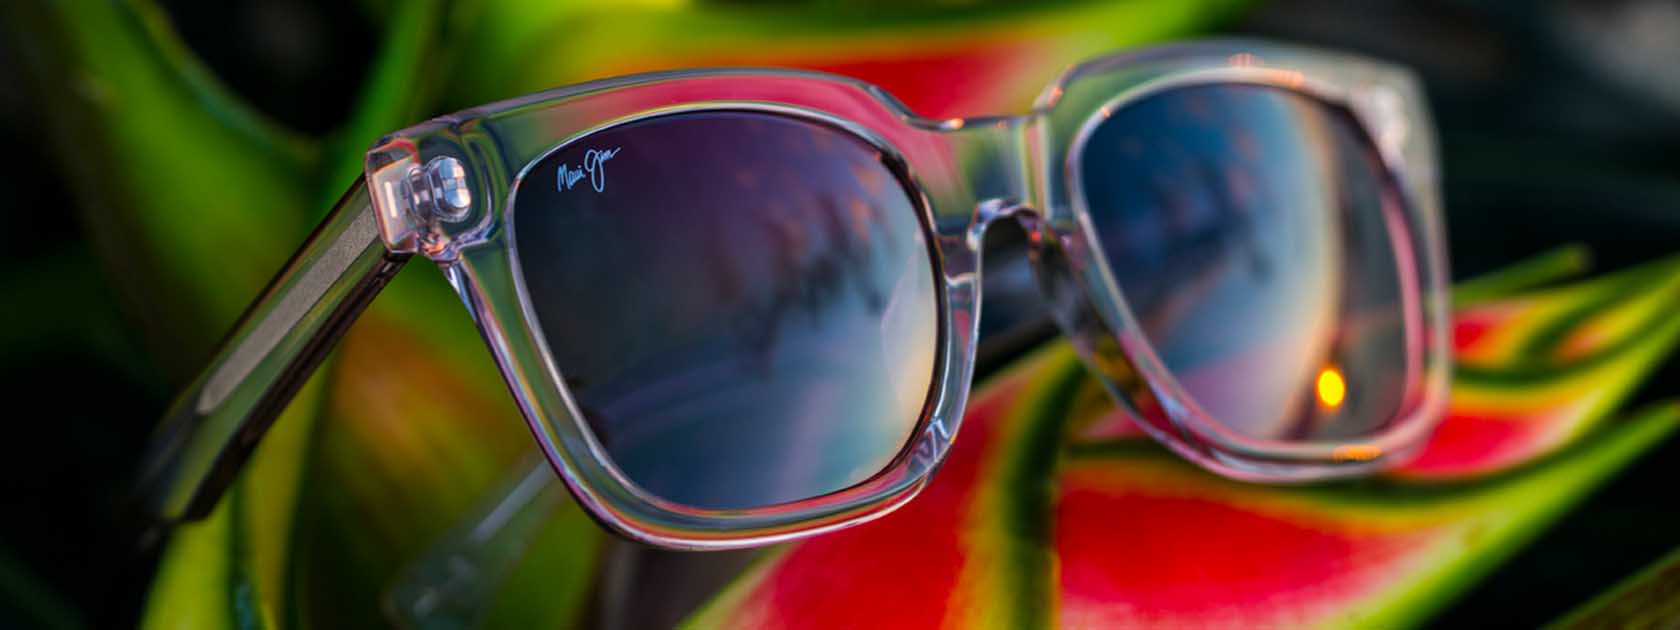 clear sunglass frame with rose lenses displayed over red and green tropical leaves